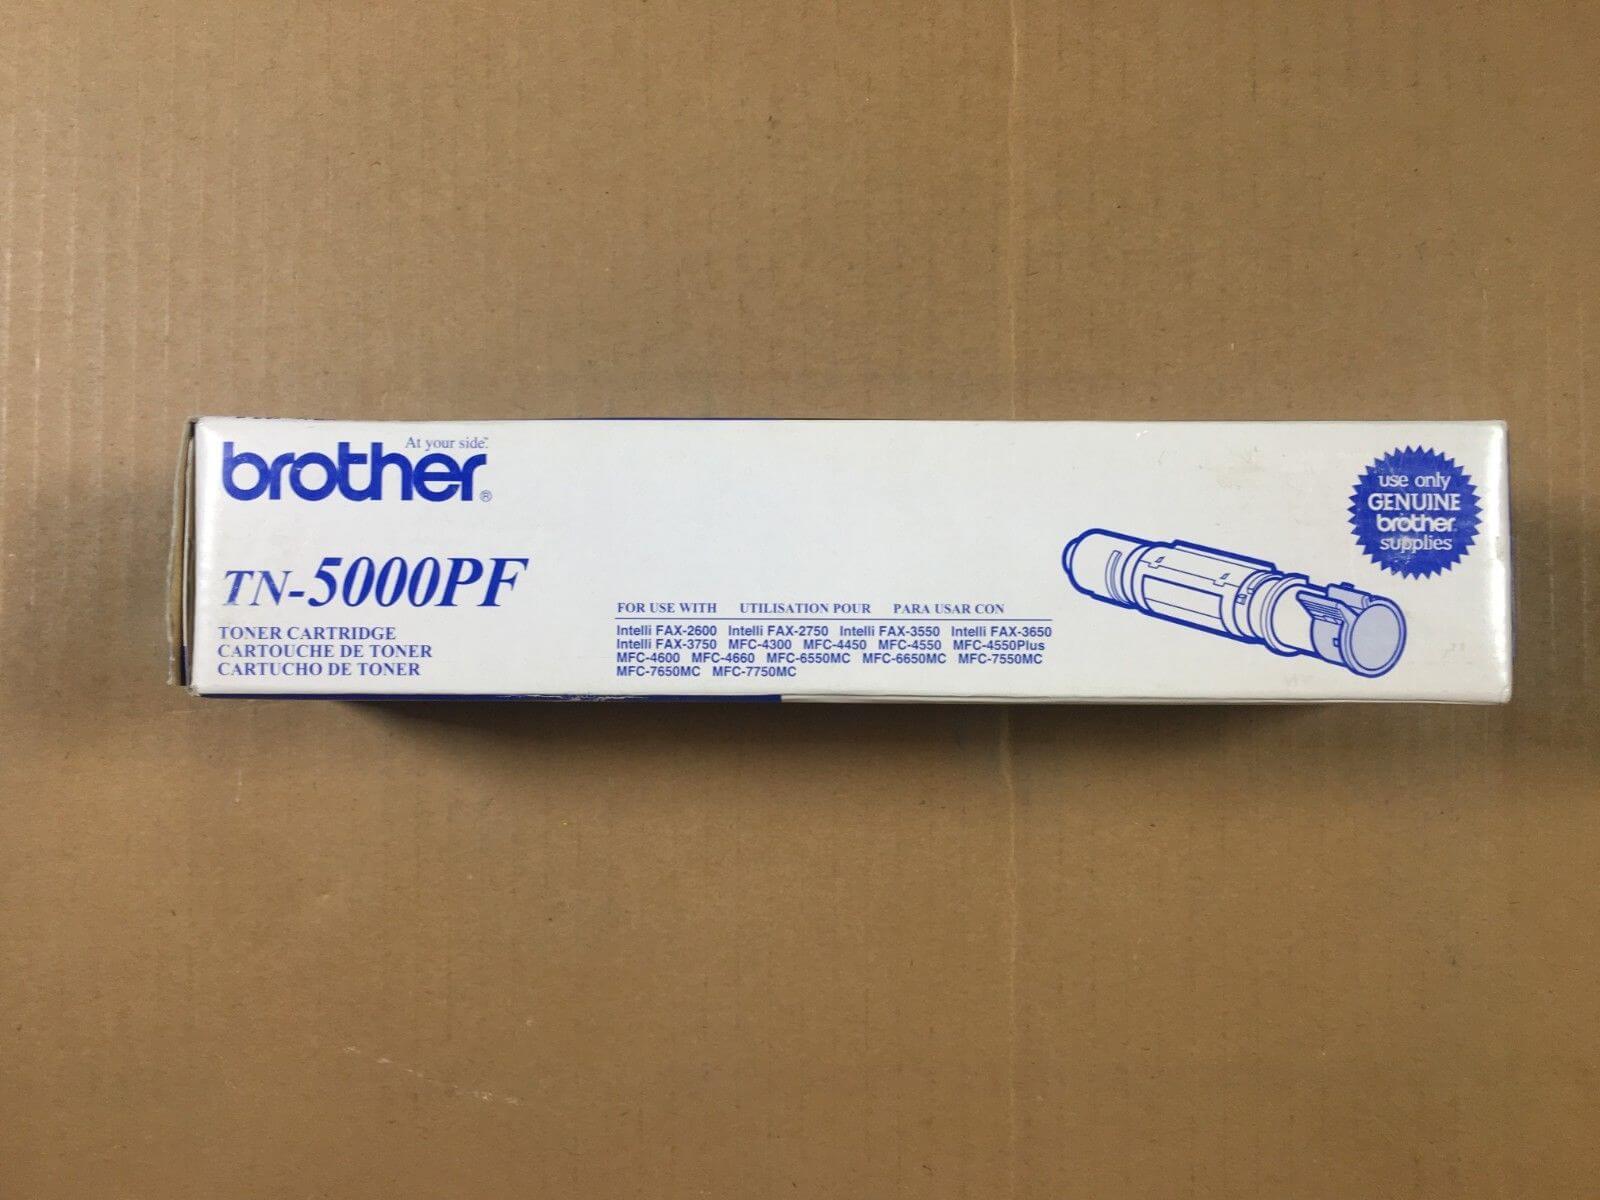 Genuine Brother TN-5000PF Black Toner for Intelli FAX-2600 Same Day Shipping - copier-clearance-center